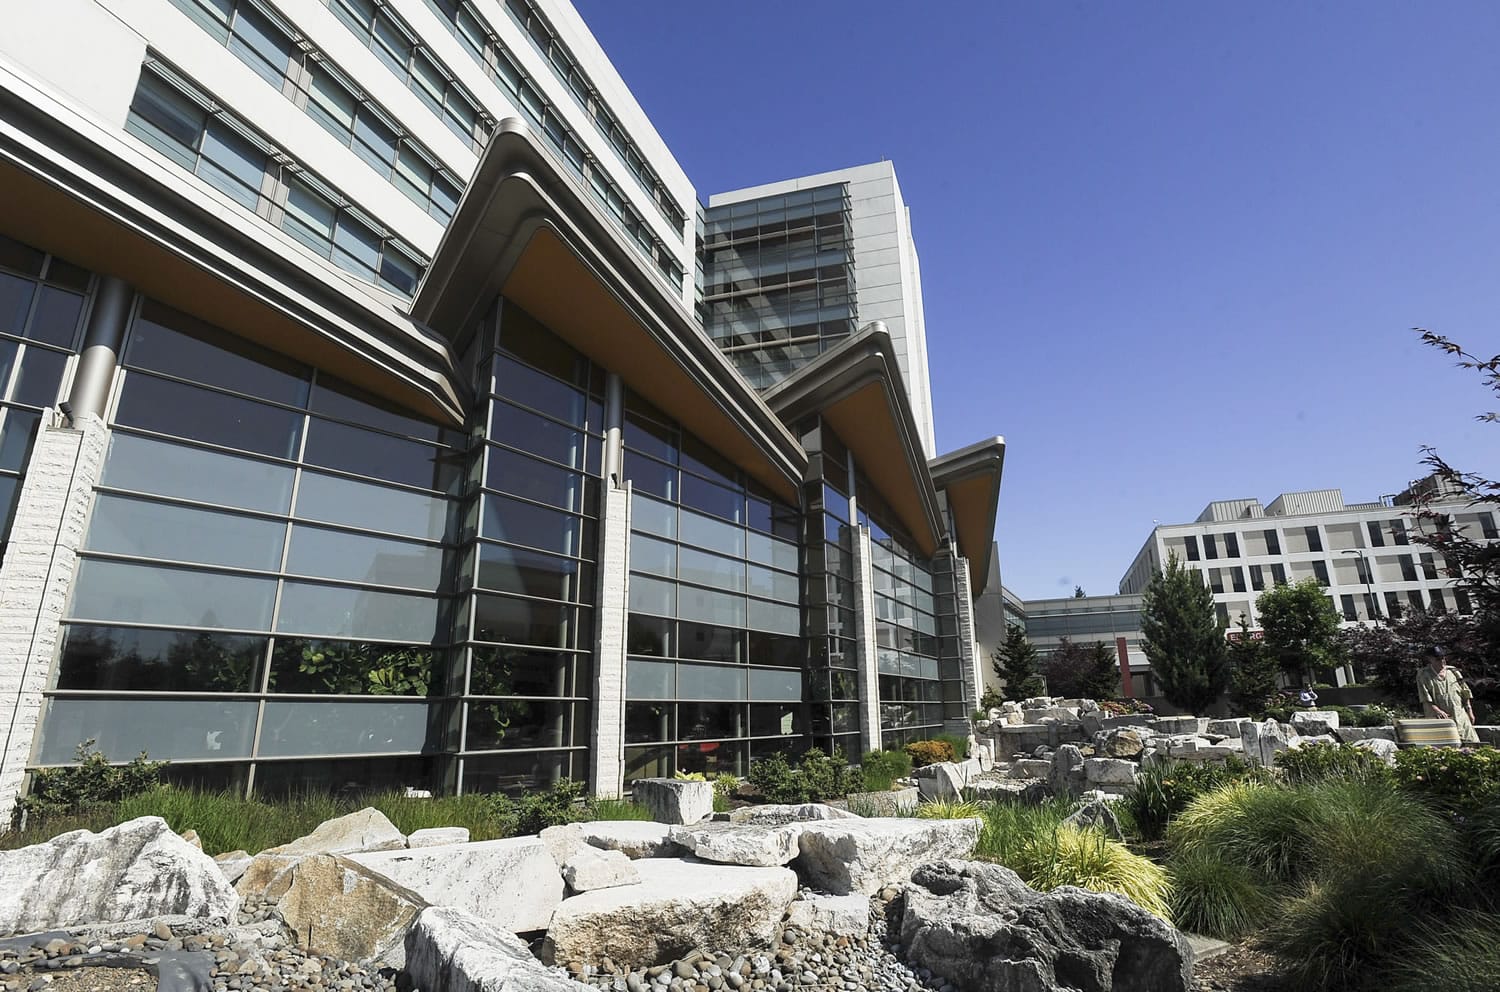 An exterior view of PeaceHealth Southwest Medical Center in Vancouver.